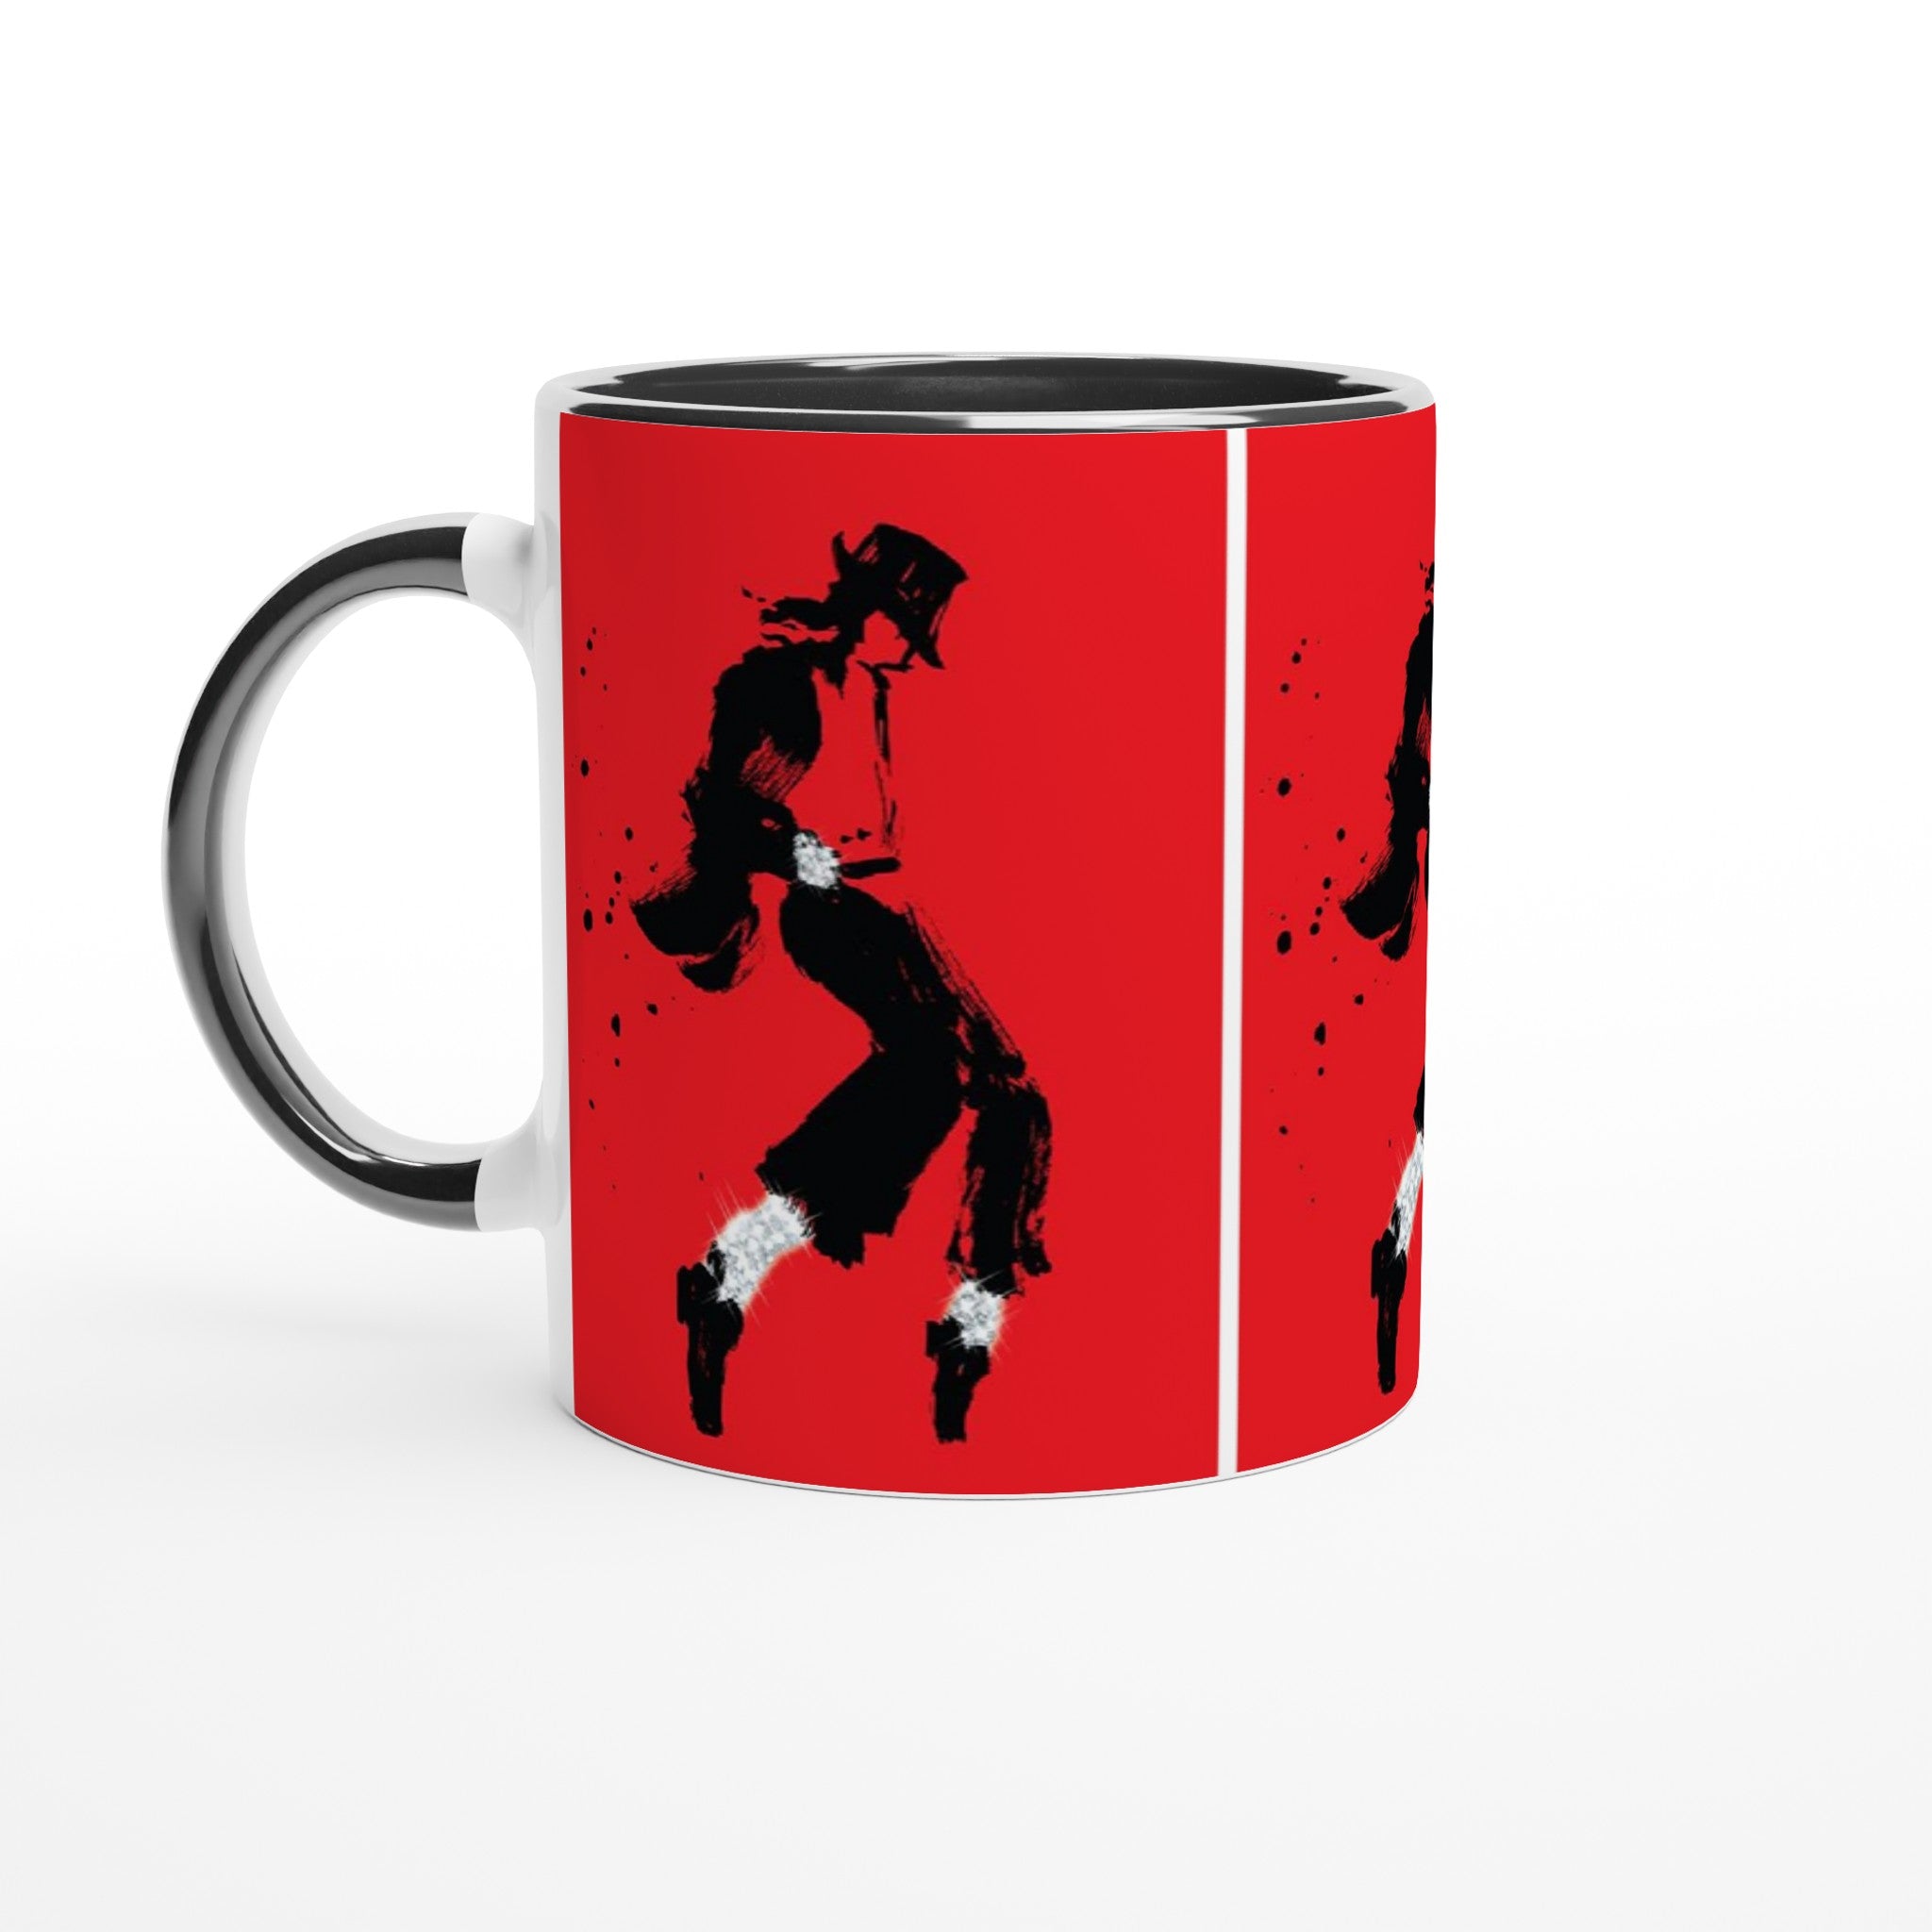 LIMITED EDITION MJ the Musical- White 11oz Ceramic Mug with Color Inside - Creations by Chris and Carlos